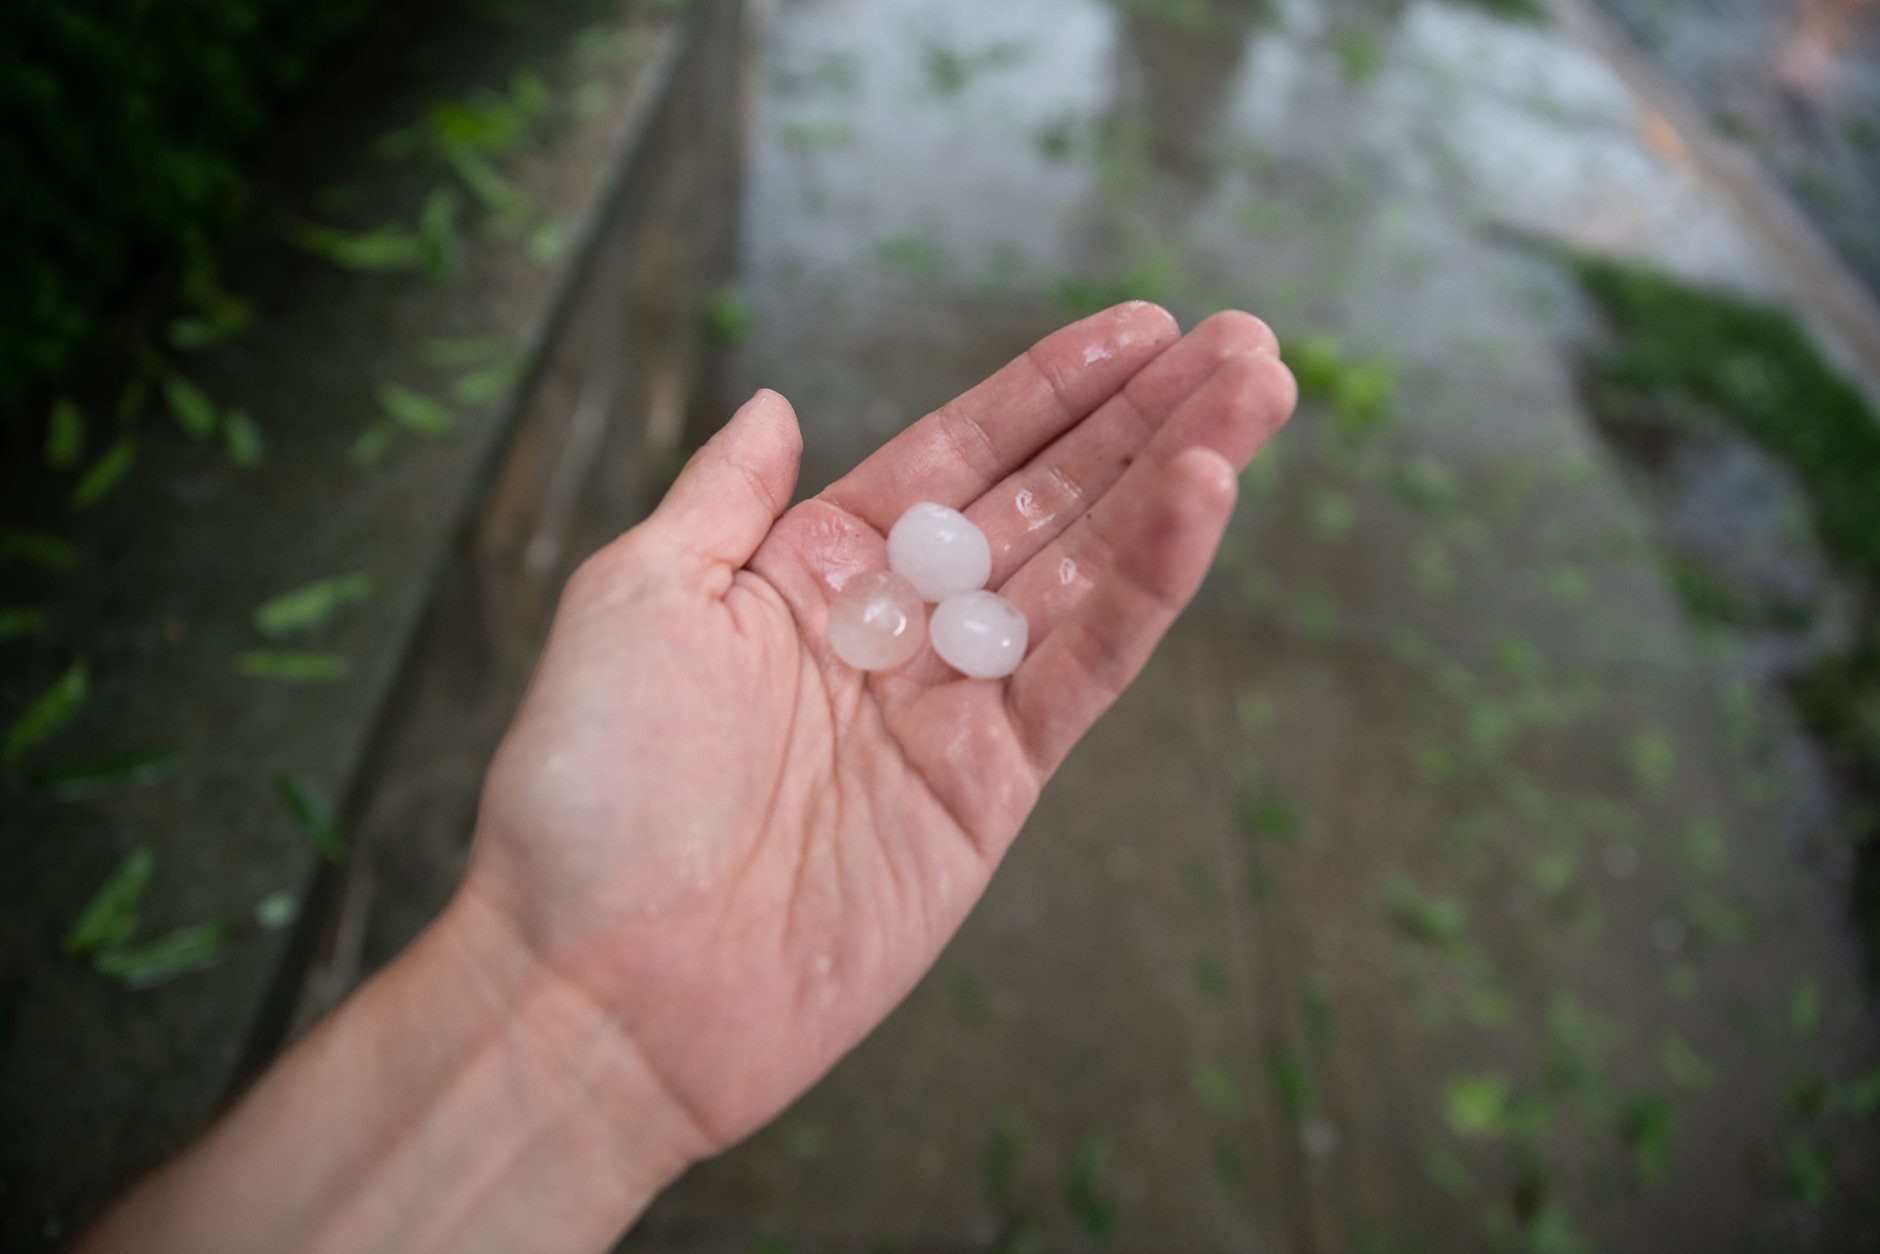 Pea to quarter-sized hail fell in Northwest D.C. on Sunday afternoon near the National Zoo for several minutes, coating roadways and damaging plants. (WTOP/Alejandro Alvarez)